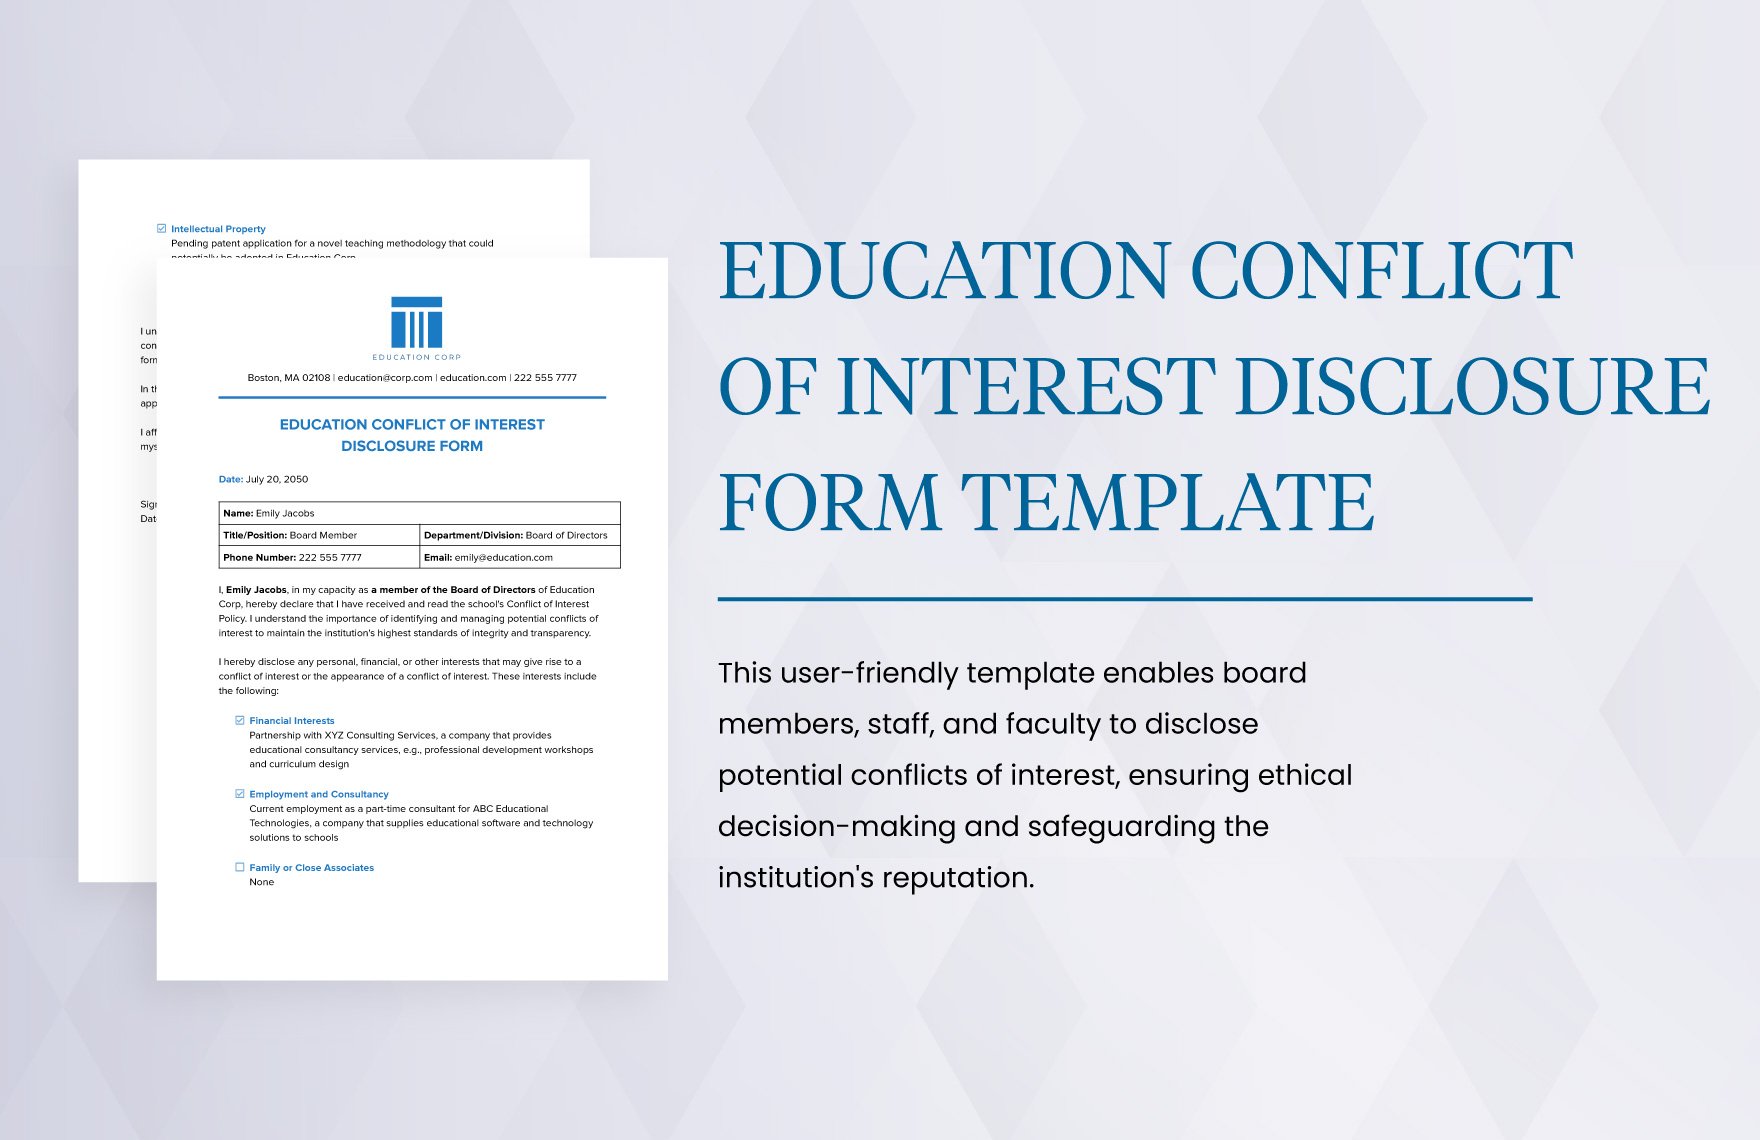 Education Conflict of Interest Disclosure Form Template